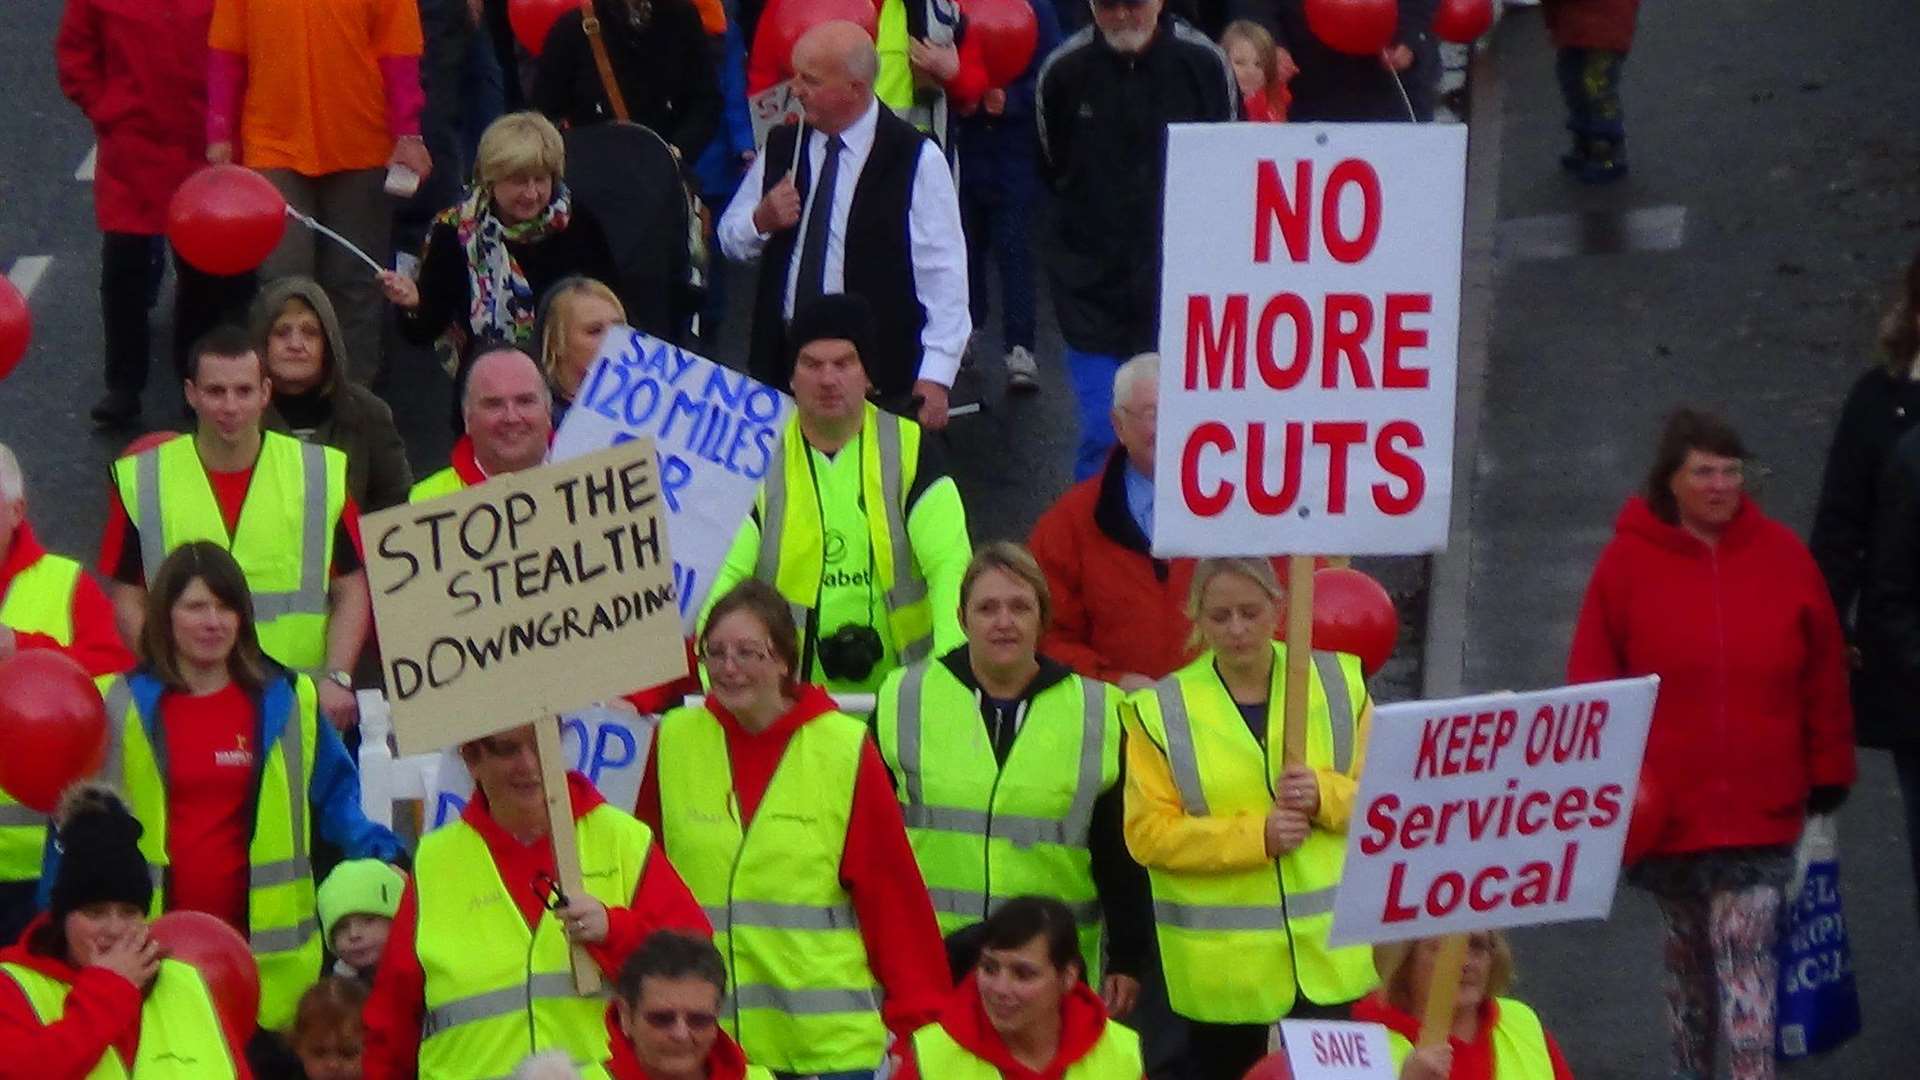 Protestors took to the streets last month against cuts to health sevices in Caithness. Photo: Will Clark